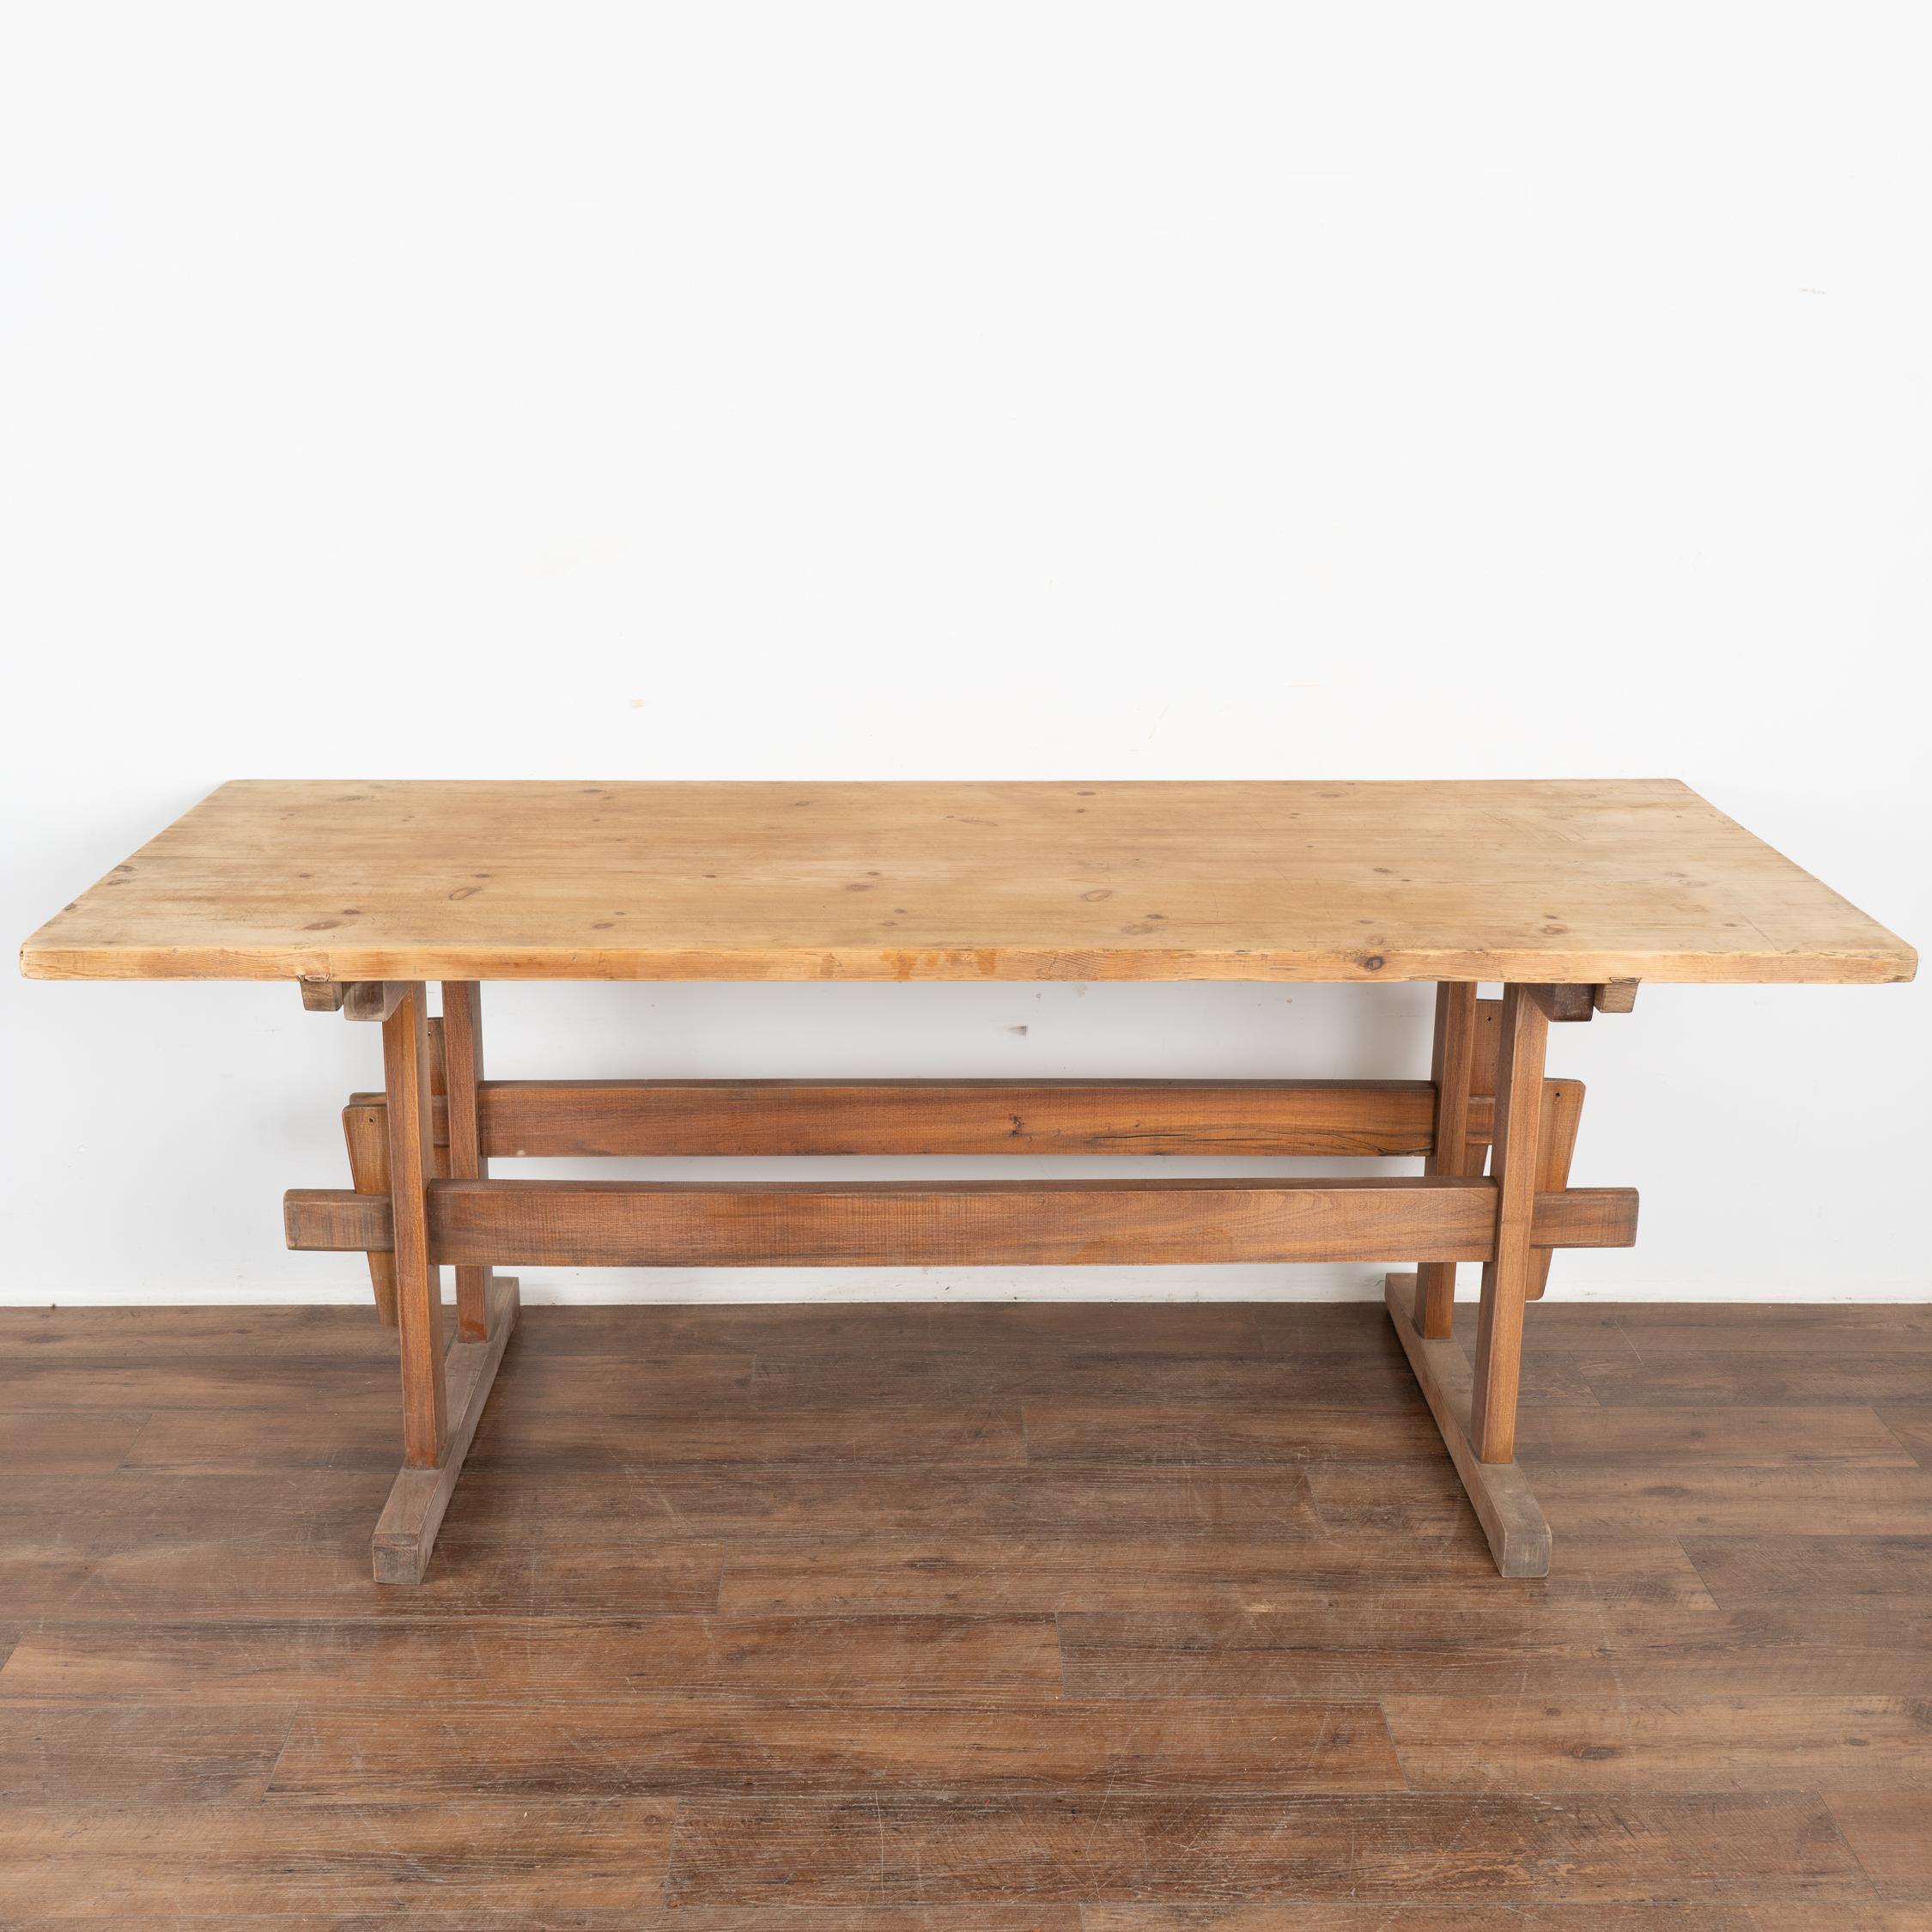 Country Antique Pine Trestle Farm Dining Table, Hungary circa 1890-1910